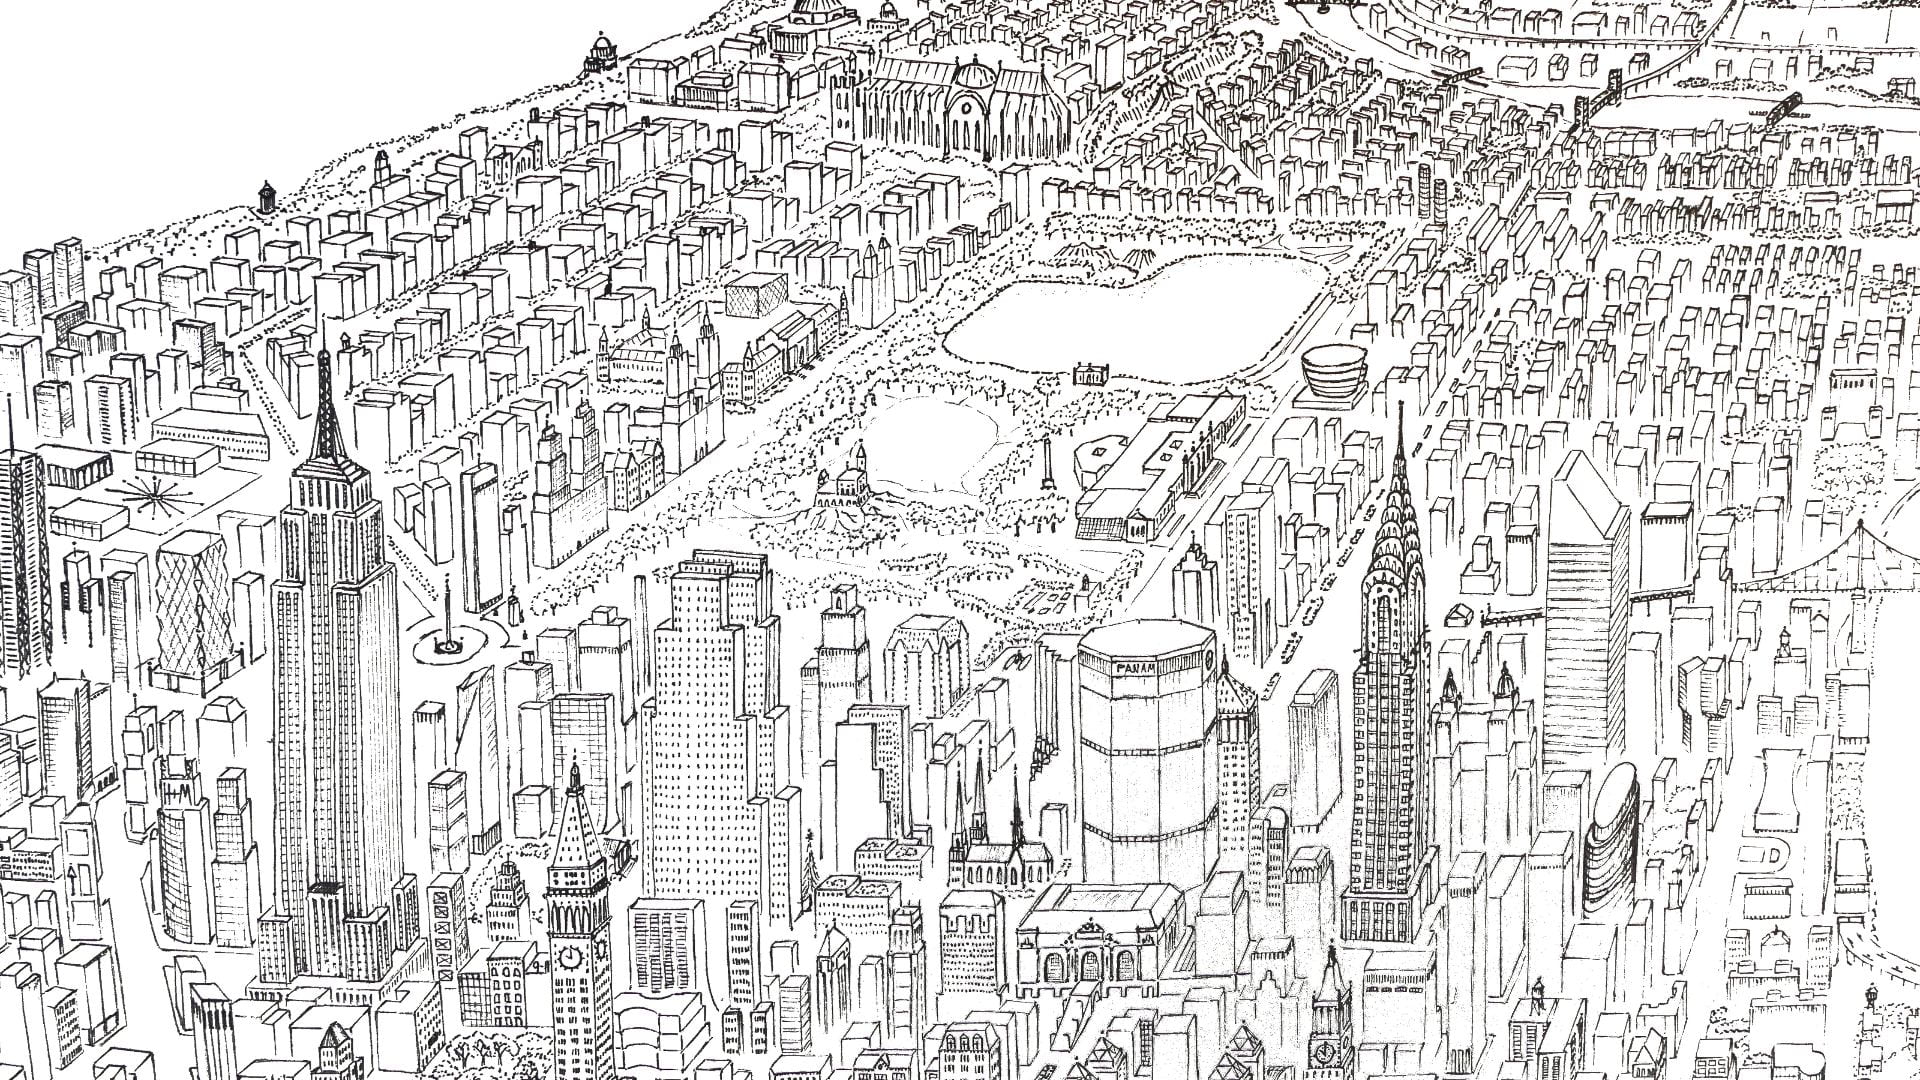 All New York City in one drawing Myles Zhang